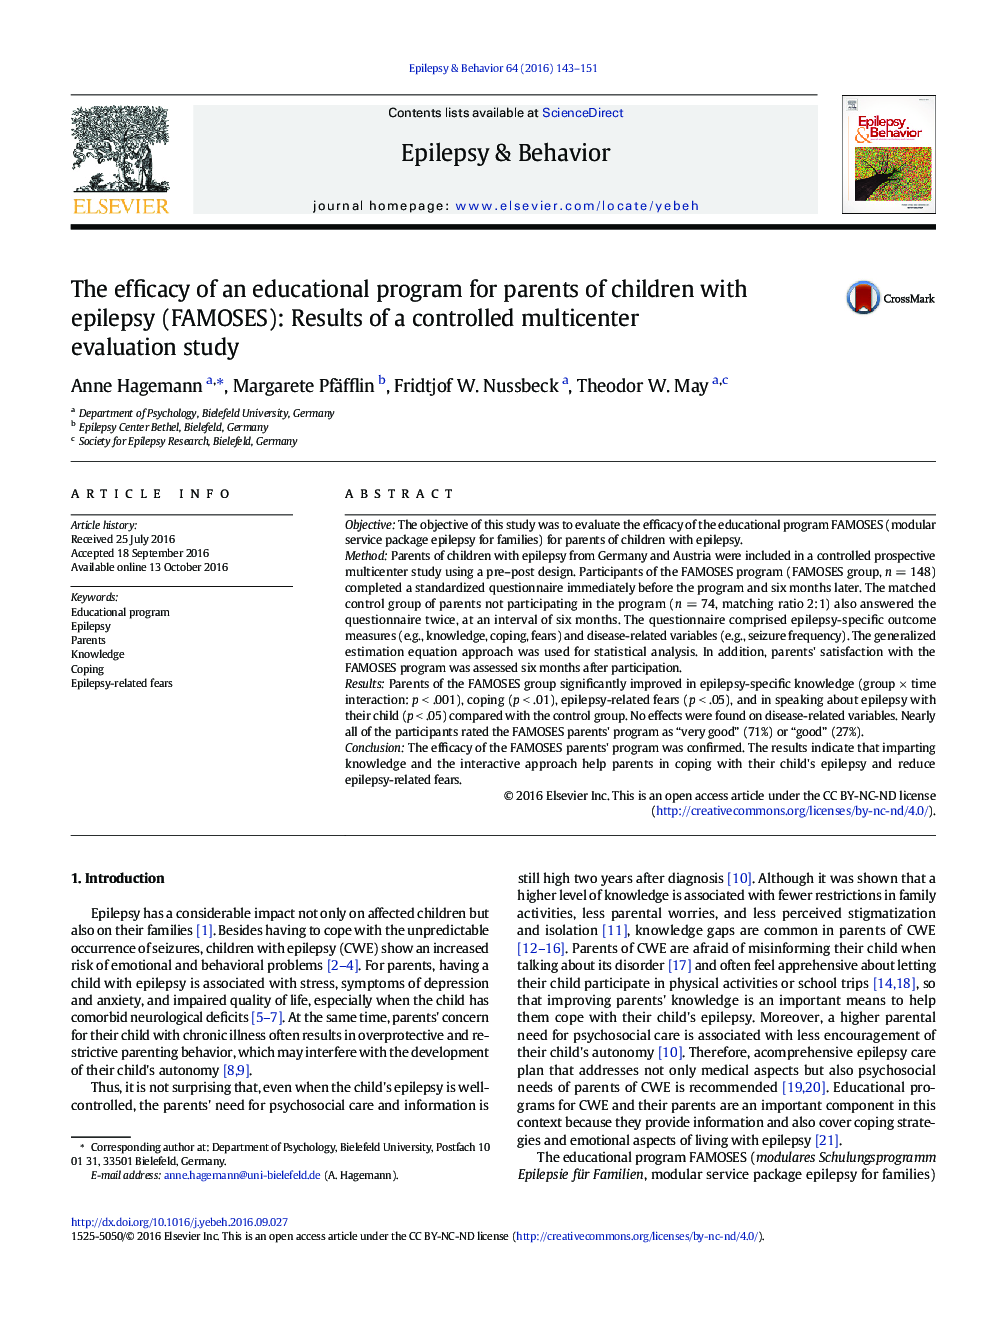 The efficacy of an educational program for parents of children with epilepsy (FAMOSES): Results of a controlled multicenter evaluation study